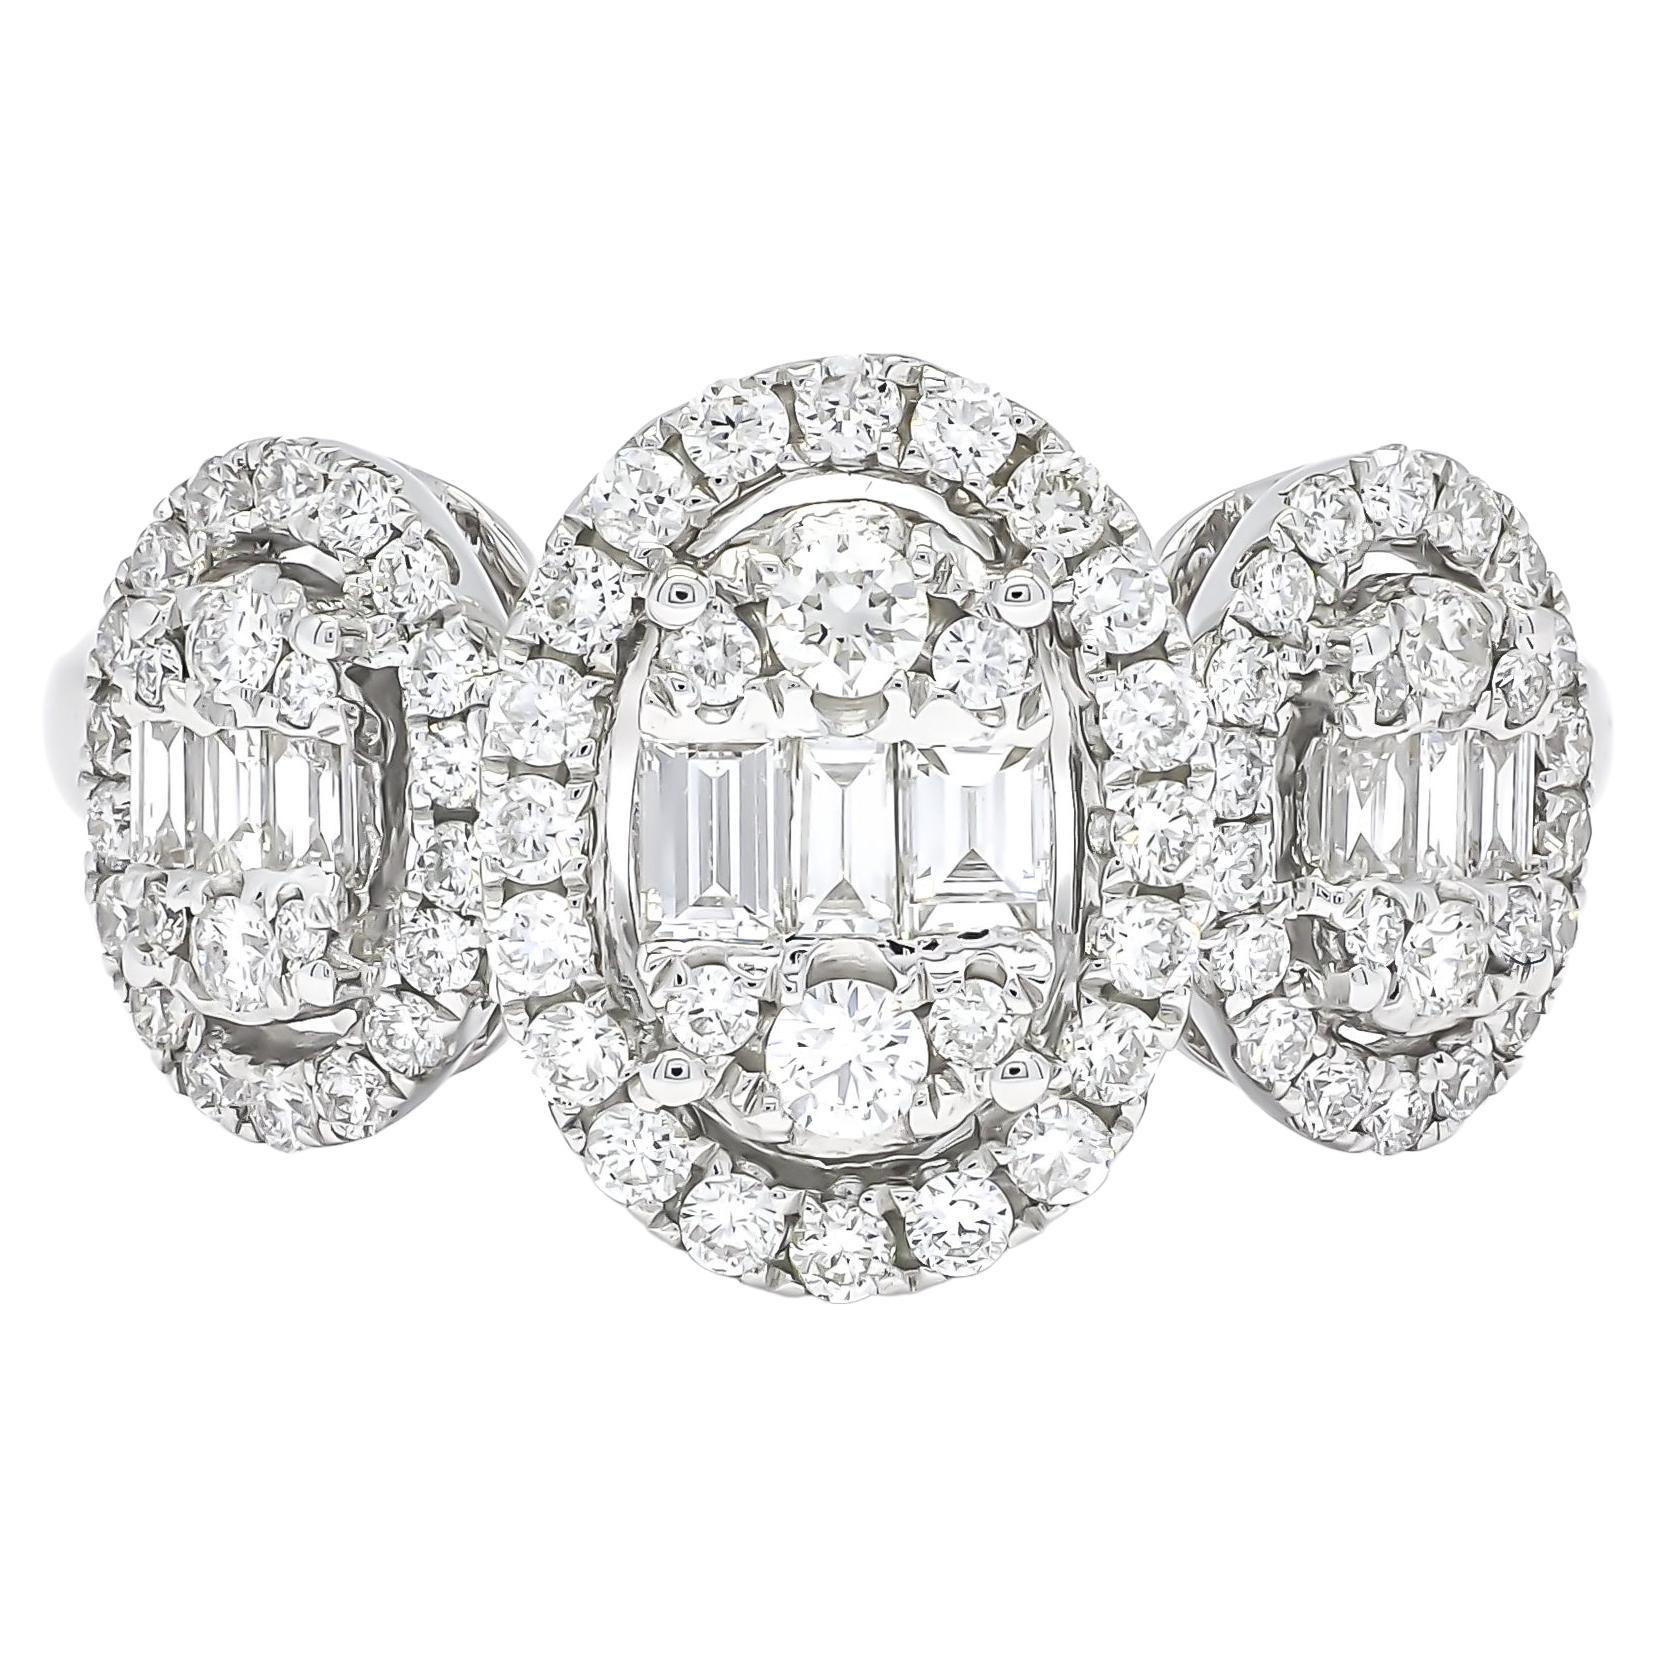 For Sale:  18KT White Gold 3 Cluster Diamond Engagement Ring R61146, Statement Diamond Ring